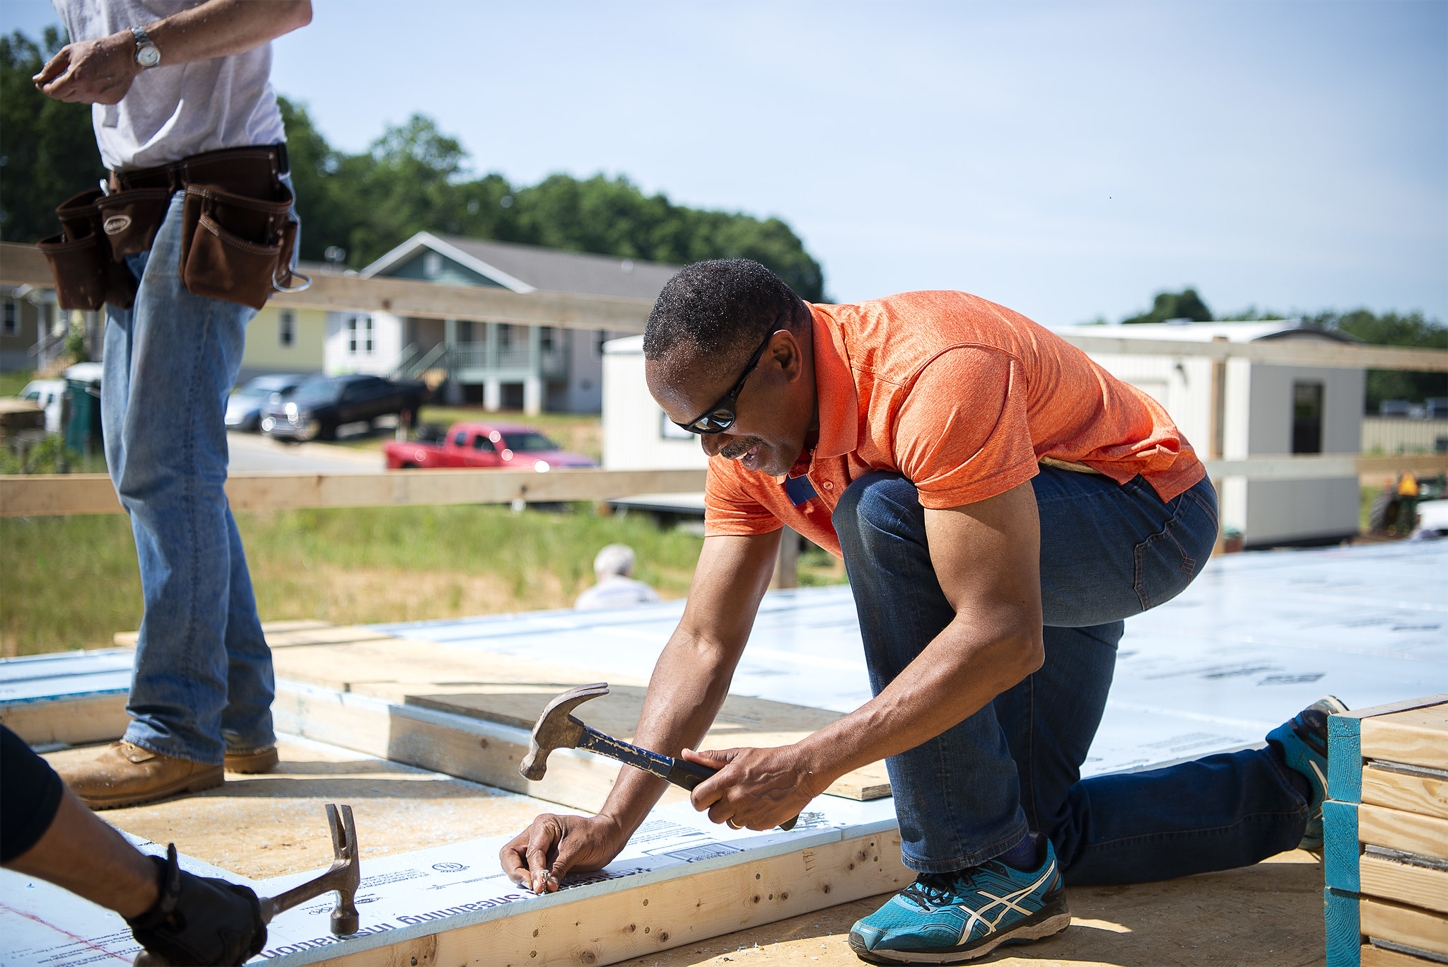 Robby Russell puts his skills to work while volunteering with Habitat for Humanity in FNB’s North Carolina region.